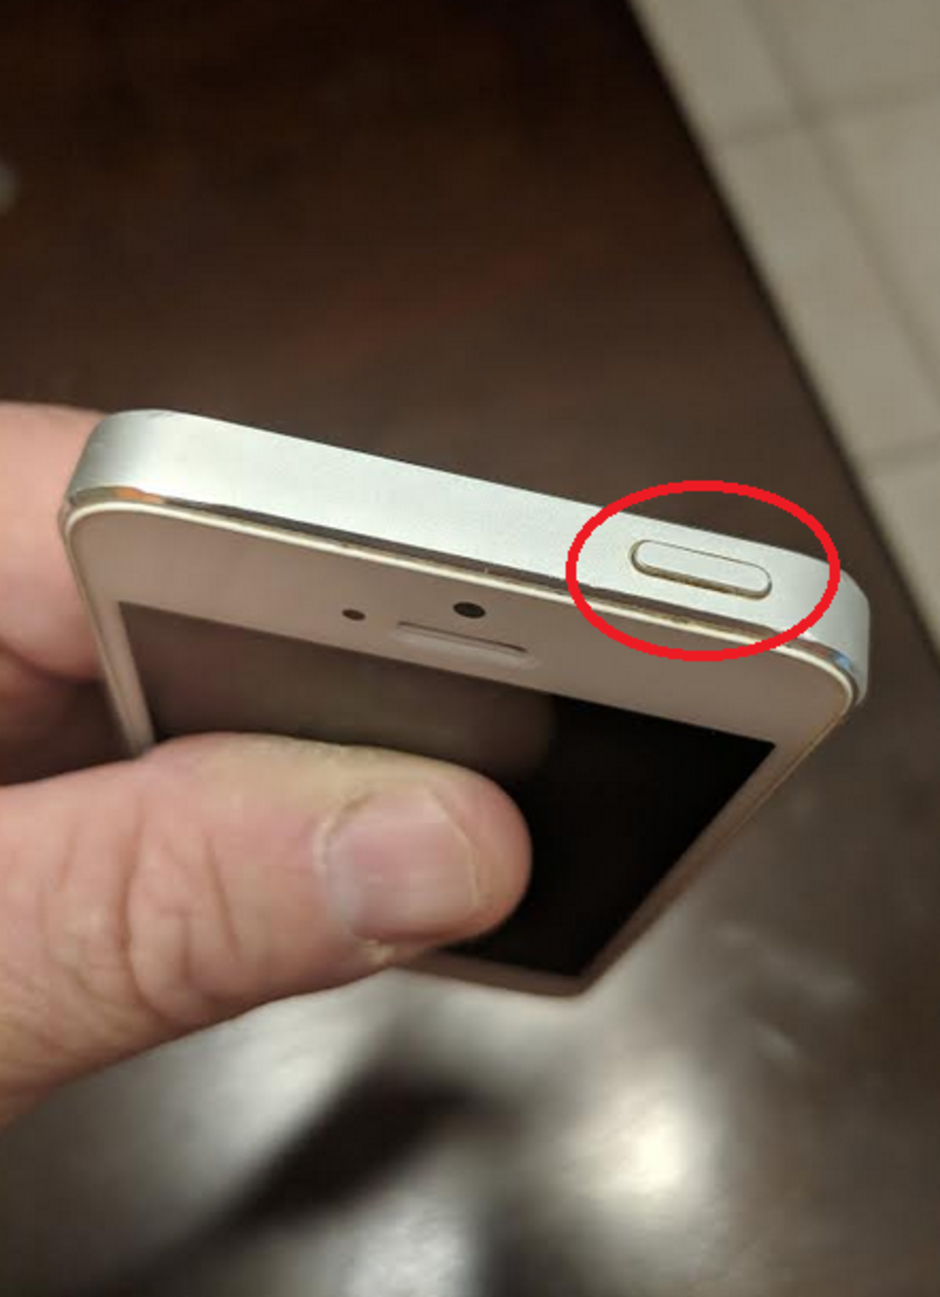 The sleep/wake button on the Apple iPhone 5 - Suit claims that Apple sold older iPhone units with a defective key part